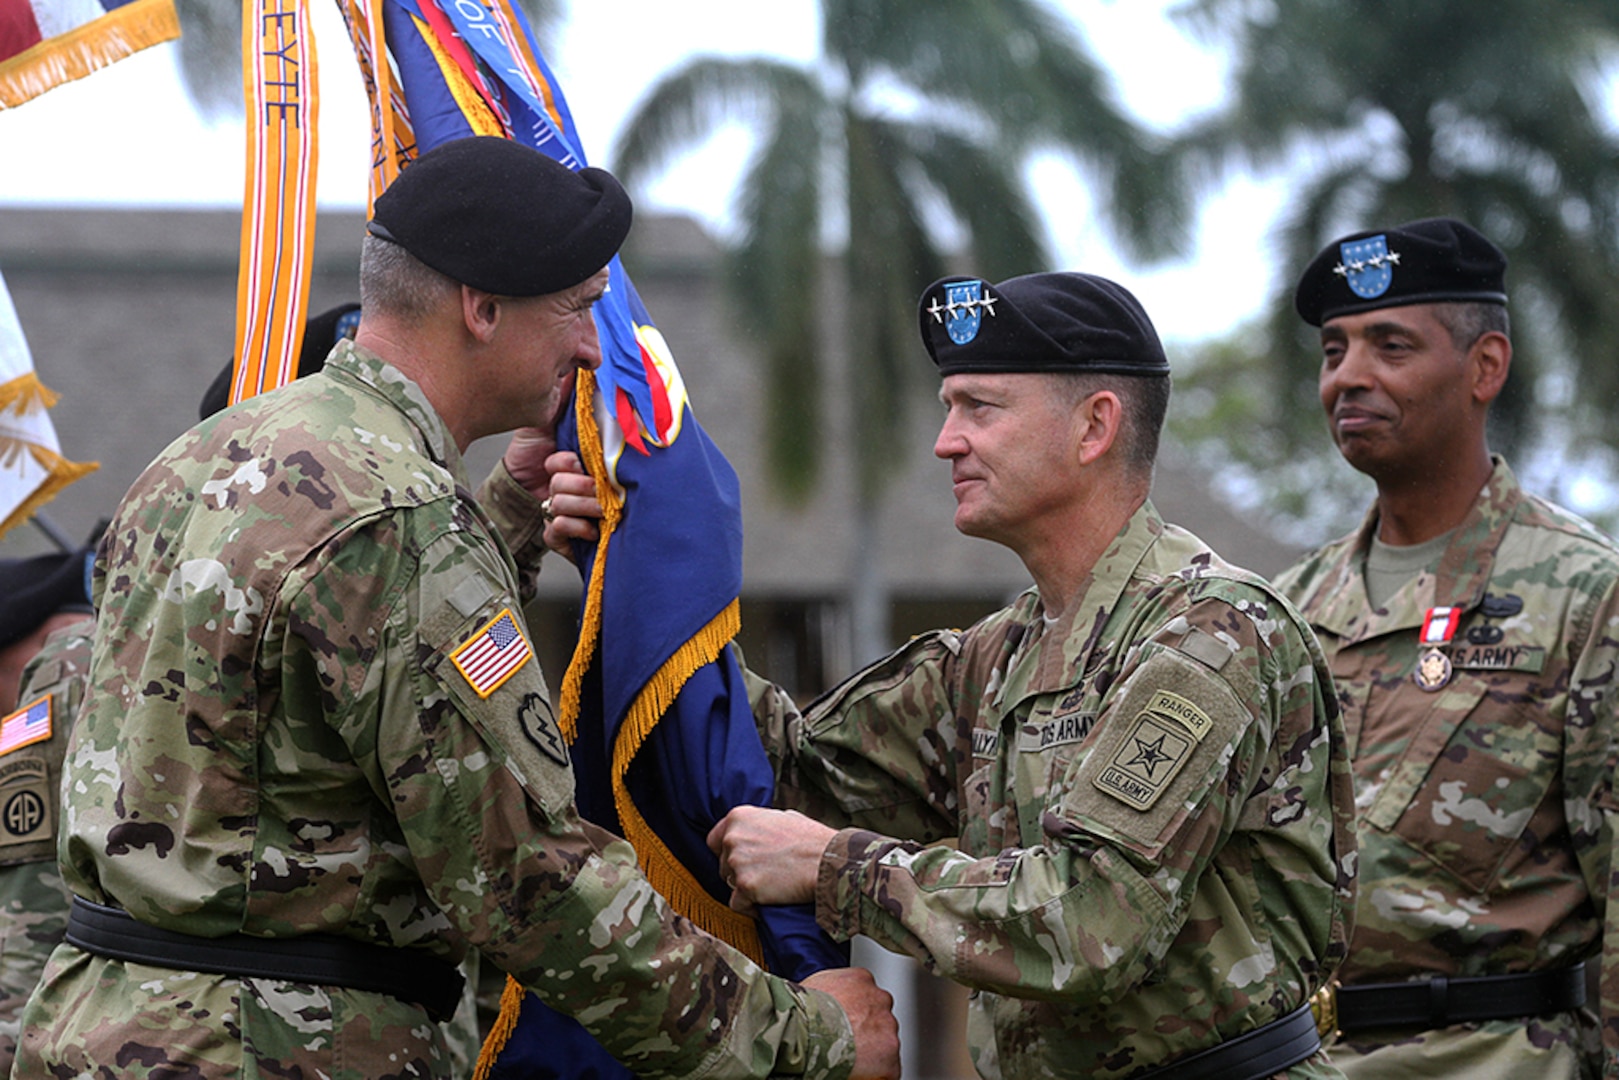 Gen. Robert B. Brown, in-coming U.S. Army Pacific commanding general receives the USARPAC colors from Vice Chief of Staff of the Army, Gen. Daniel B. Allyn, during a change of command ceremony held at historic Palm Circle, Fort Shafter, Hawaii, May 4. While Gen. Brown receiving the colors signifies his assuming command of the “One Team” ohana. 